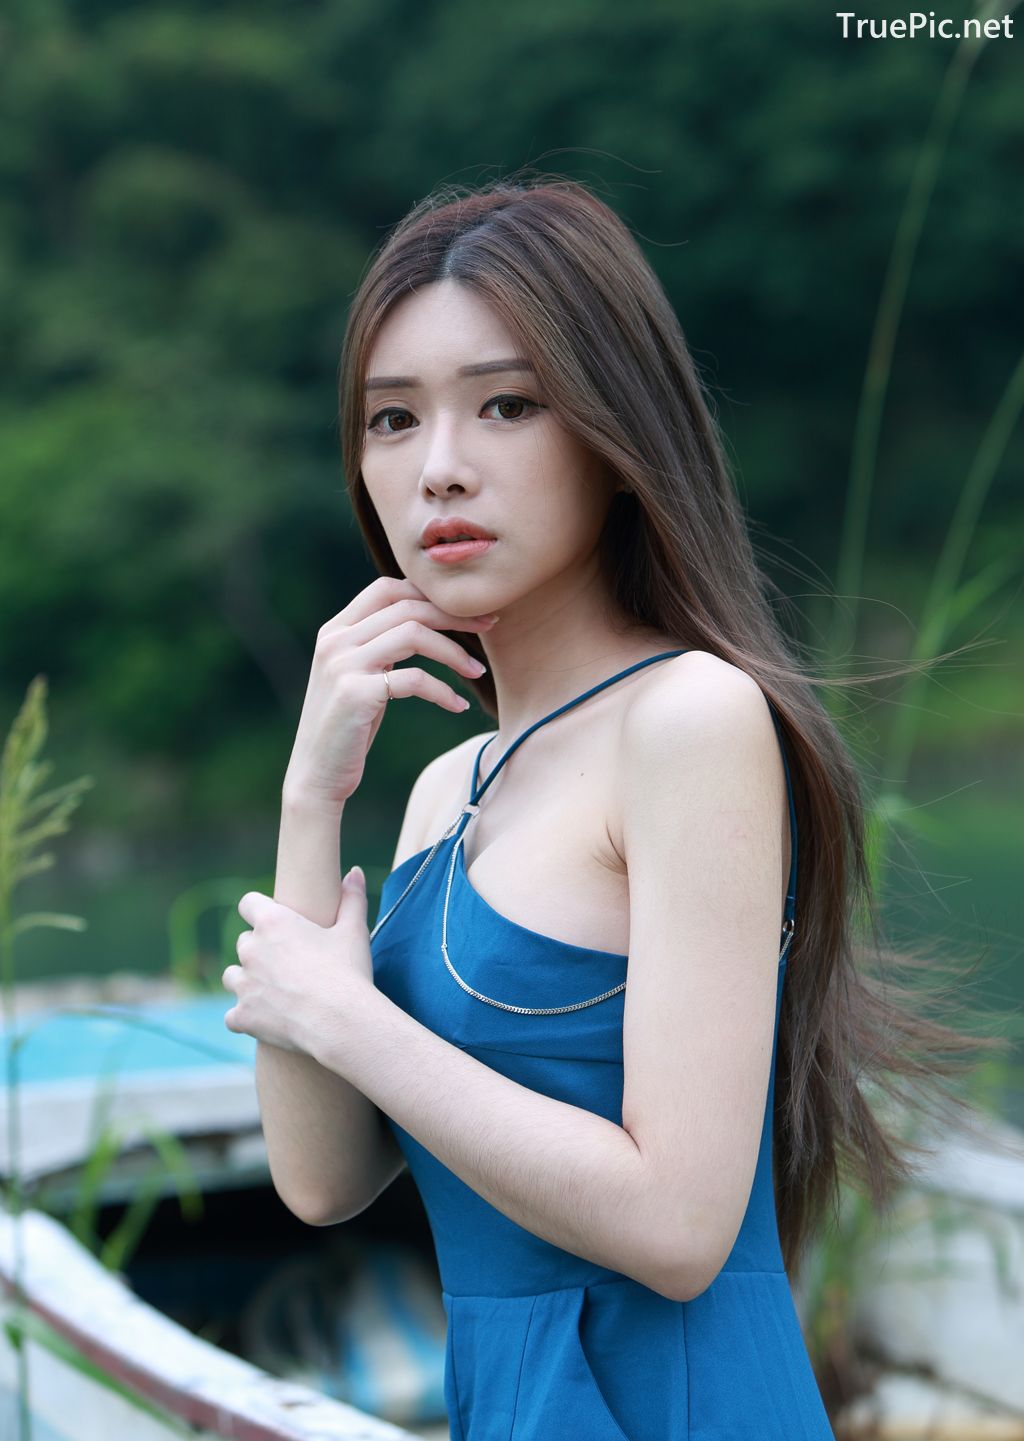 Image-Taiwanese-Pure-Girl-承容-Young-Beautiful-And-Lovely-TruePic.net- Picture-11